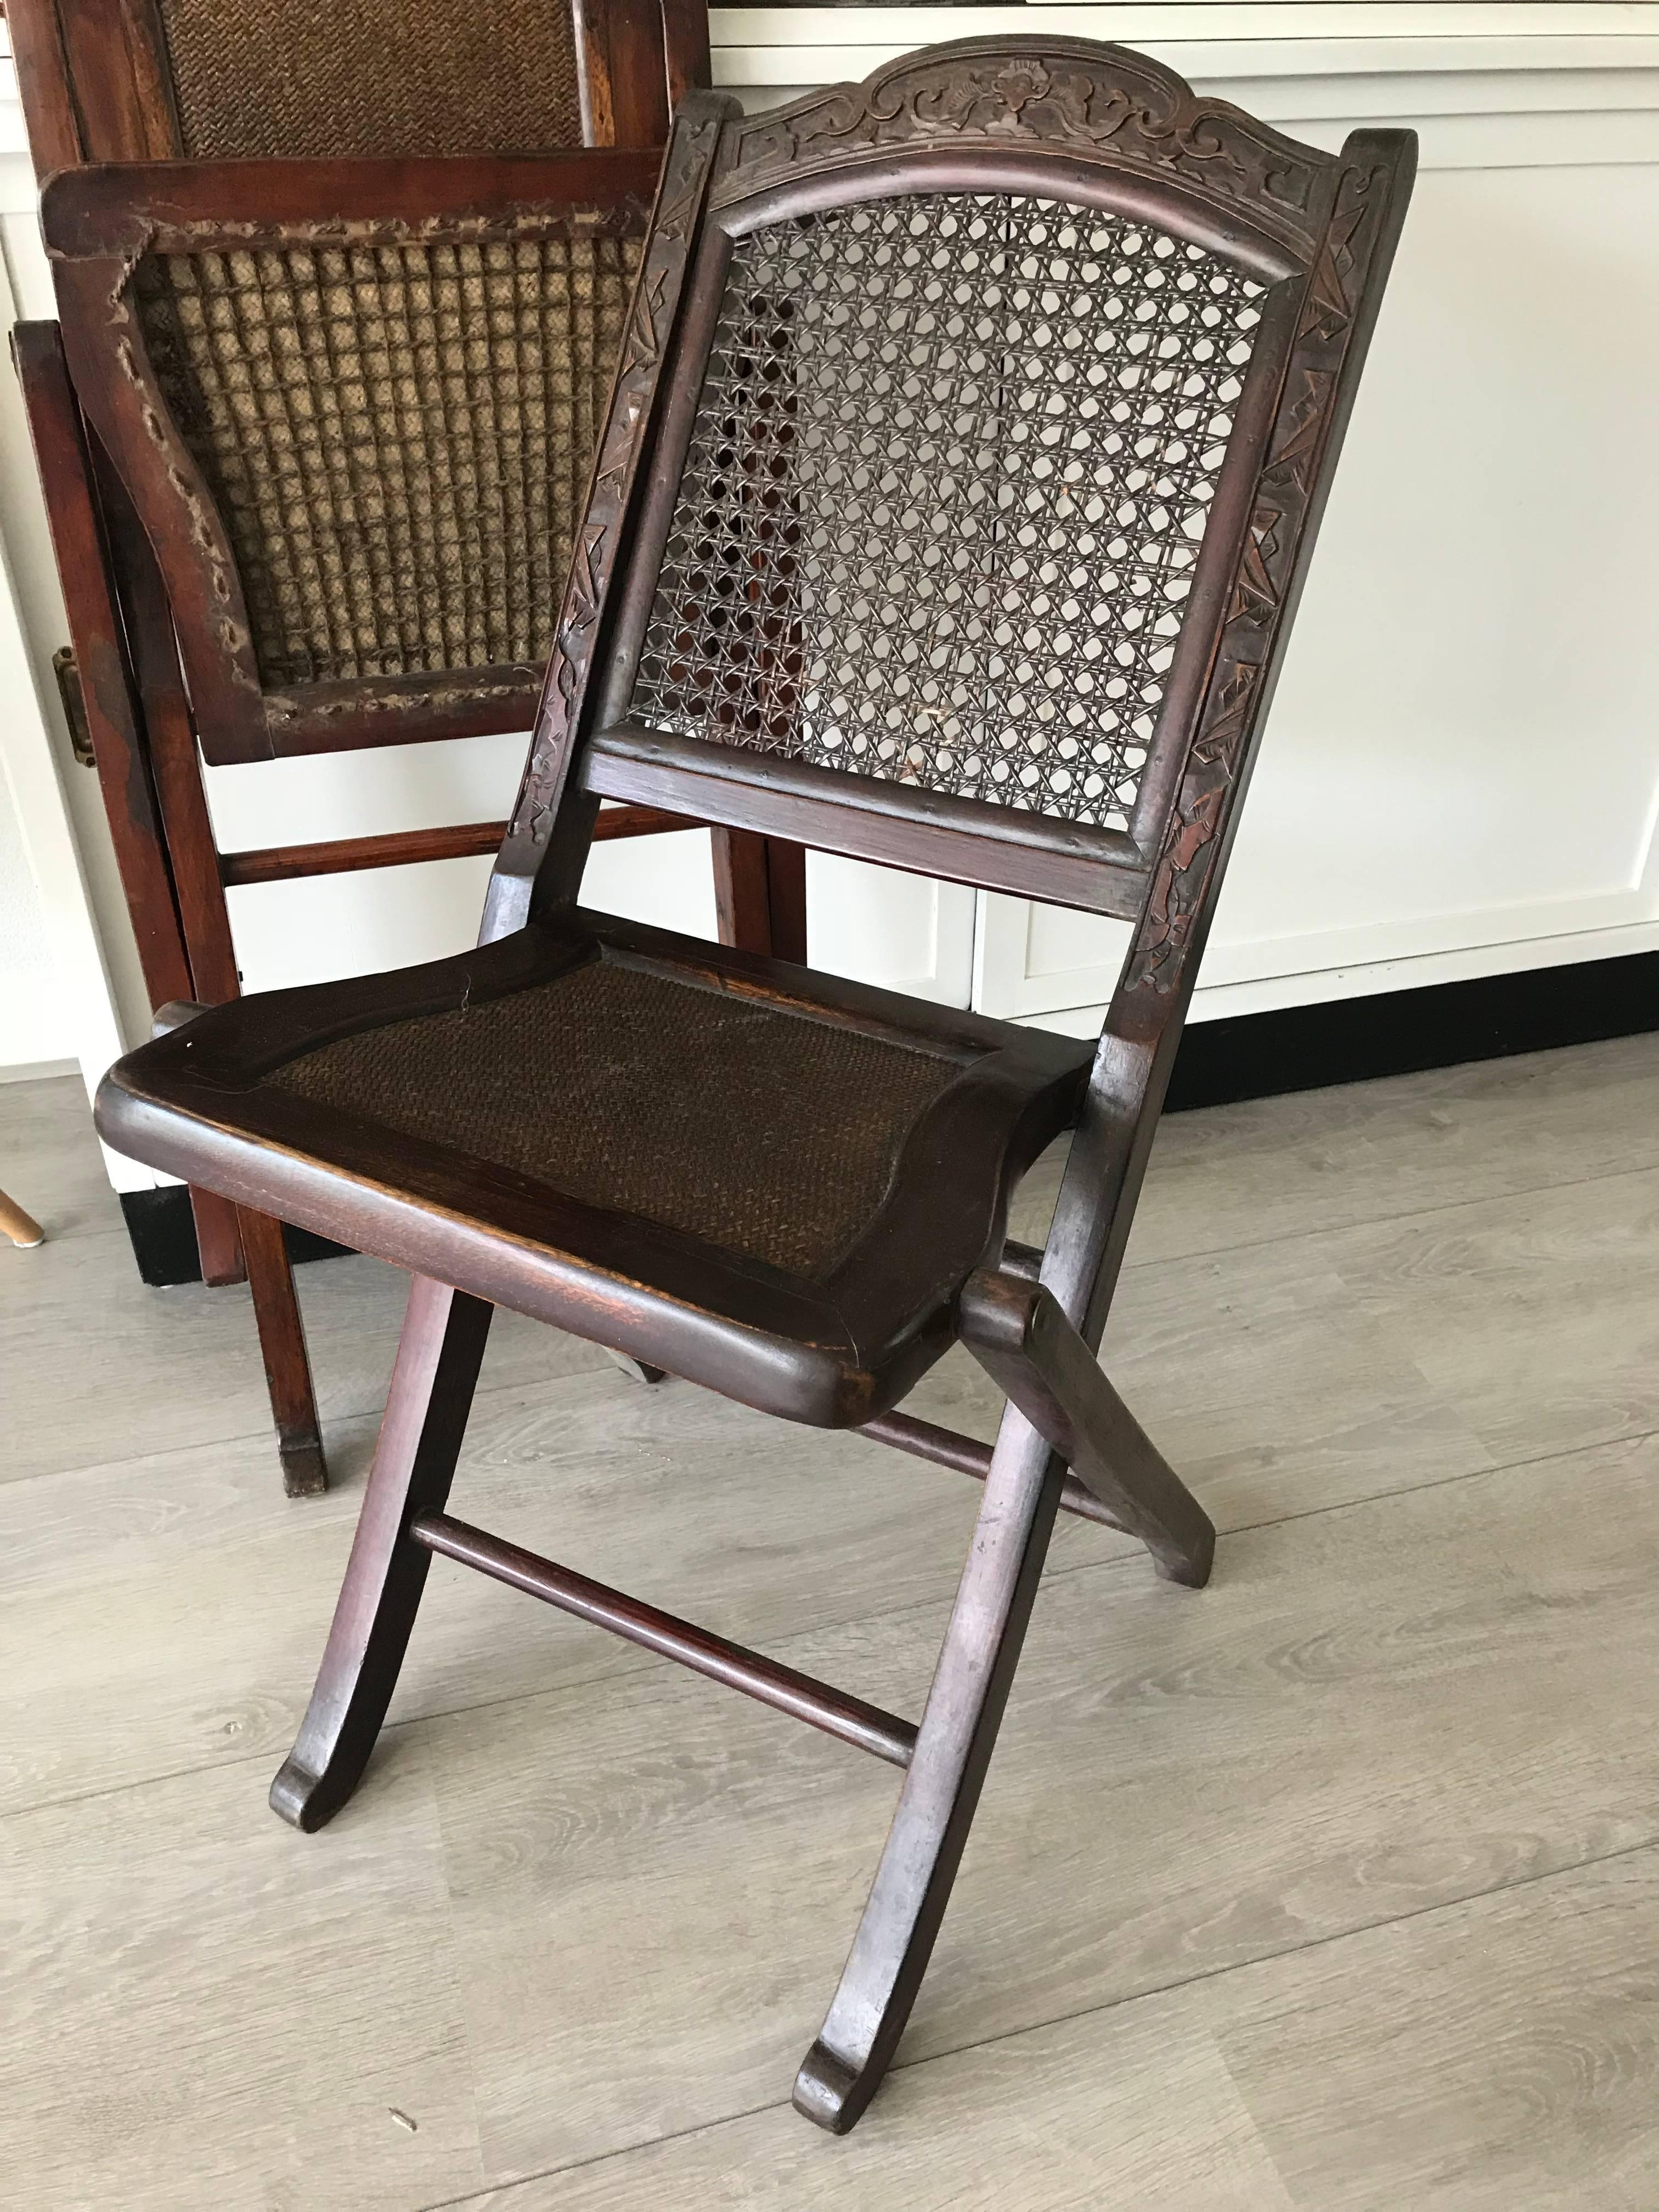 Two very stylish and highly decorative Asian chairs.

These all-handcrafted early 20th century Chinese folding chairs are a rare find. The wonderful designs and patina make them an absolute joy to own and look at. Both these chairs come with an